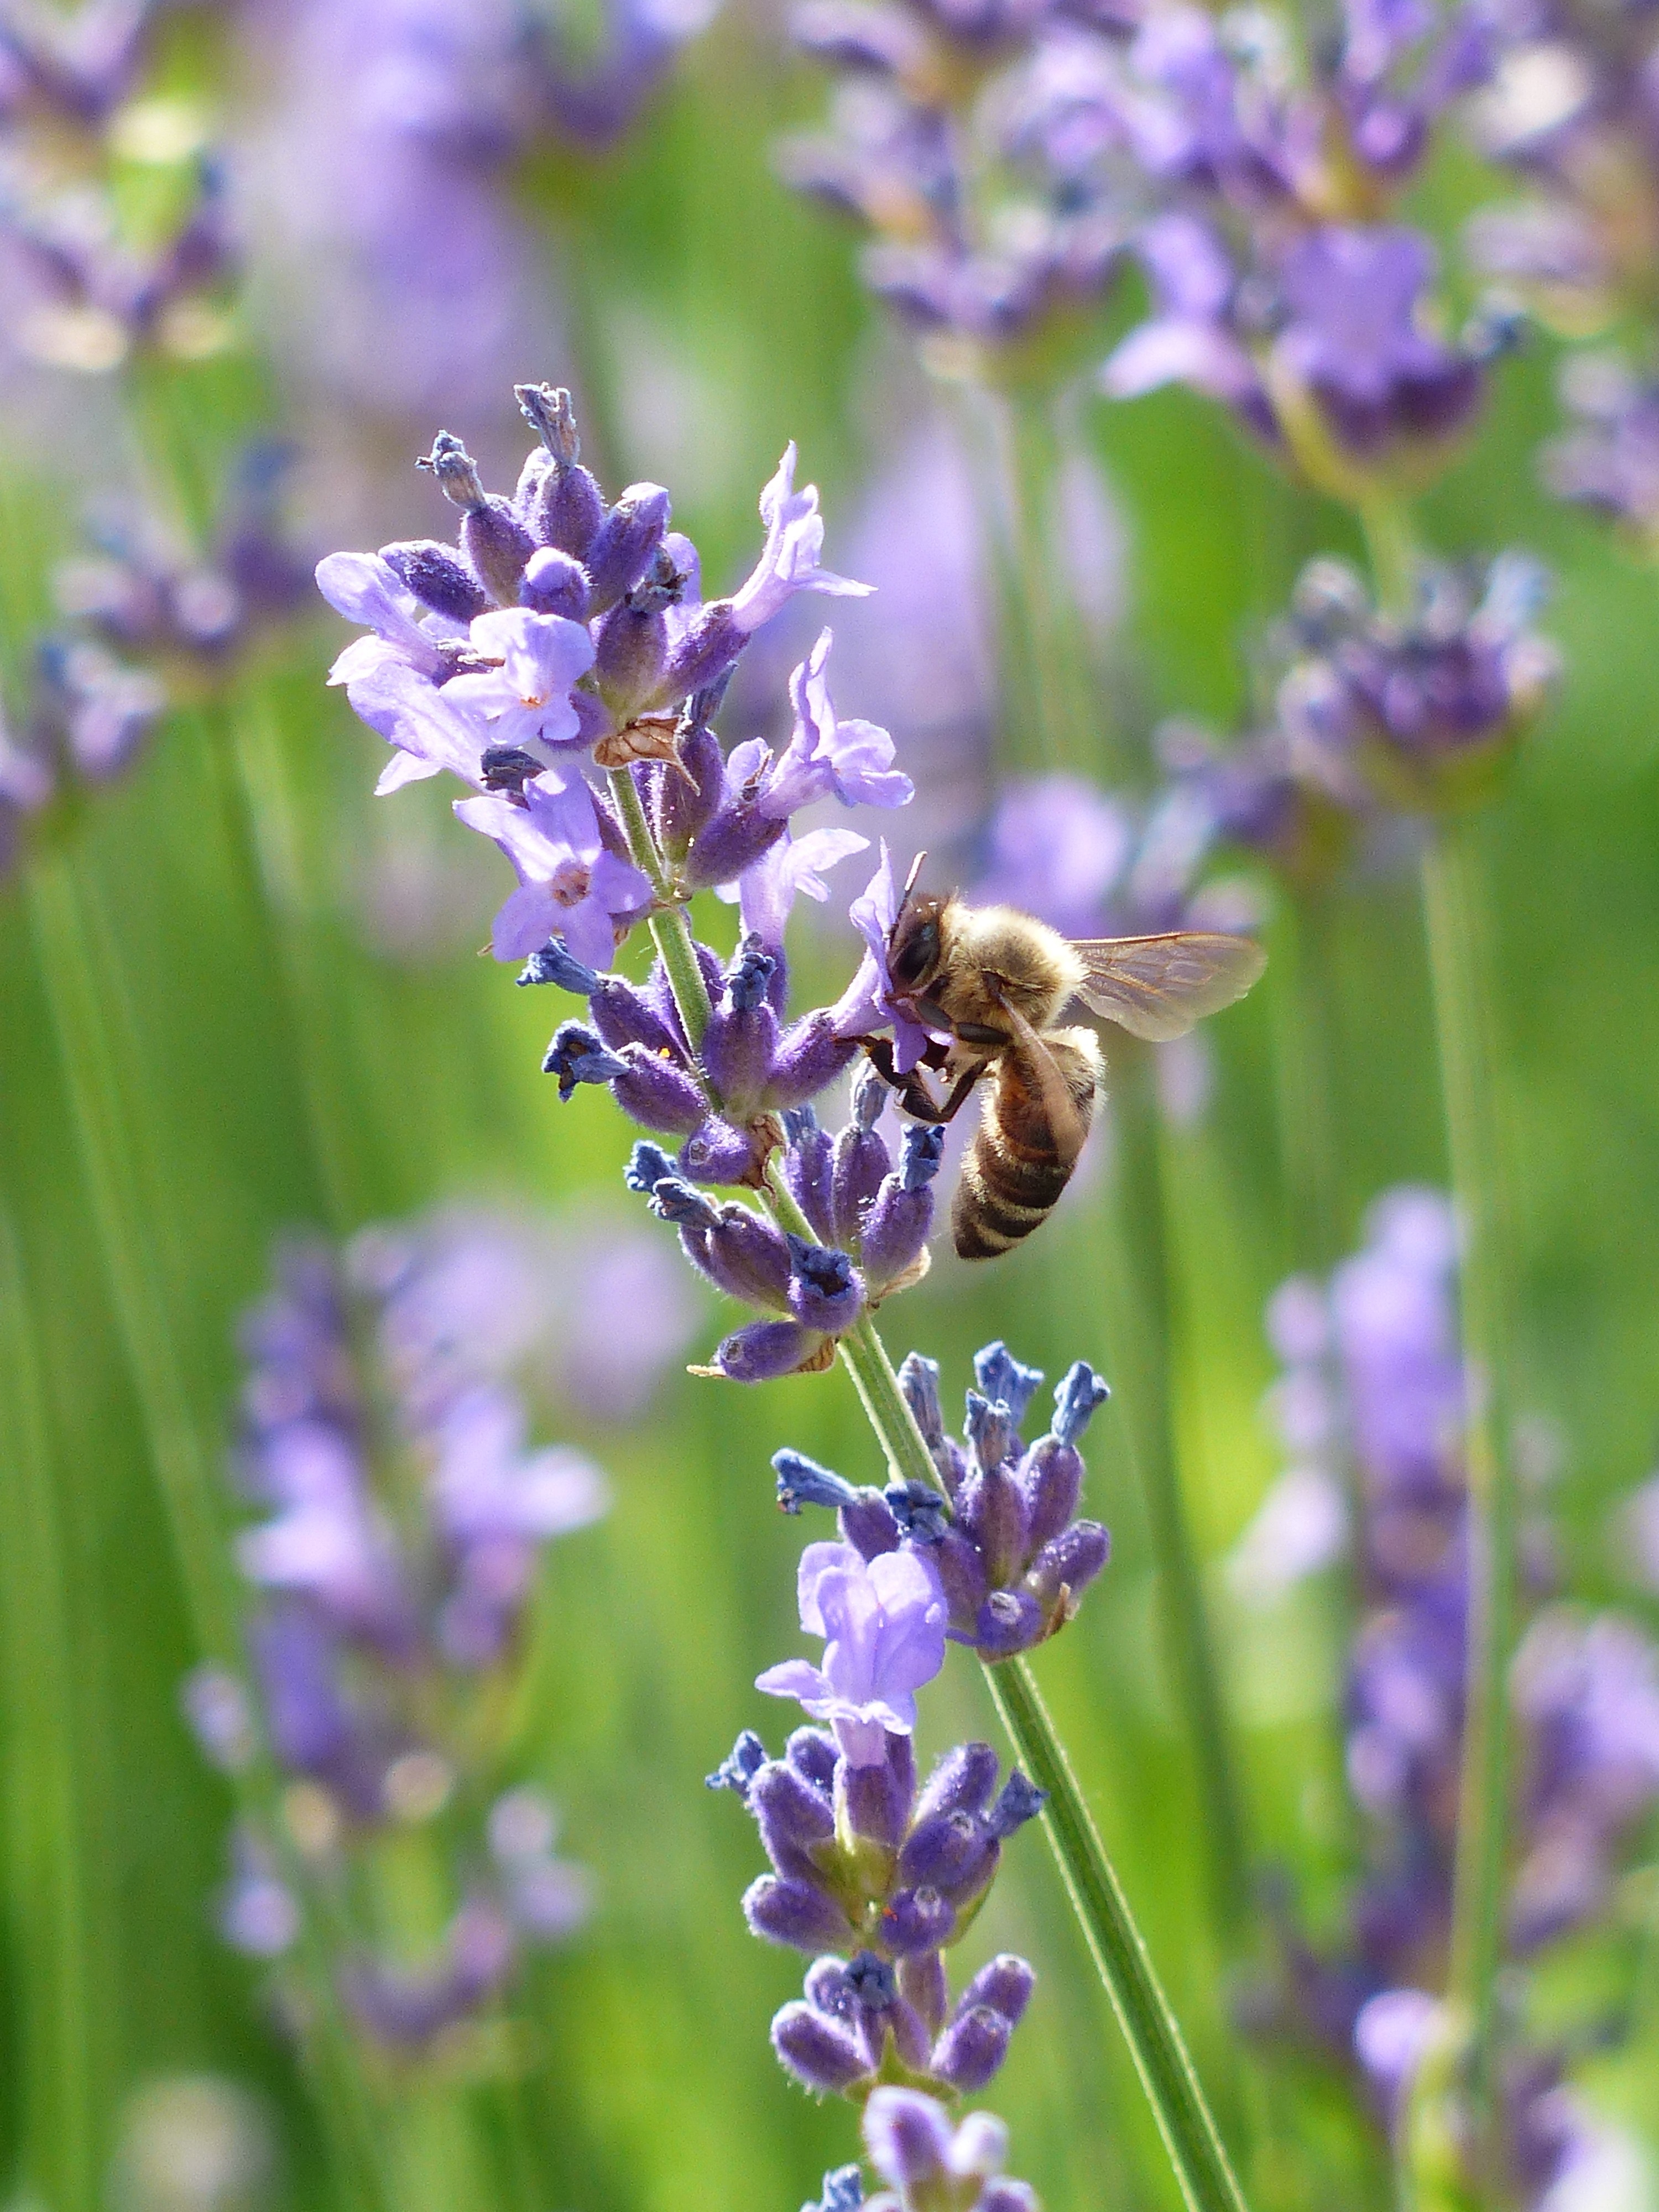 Lavender flowers attract bees that help pollinate.